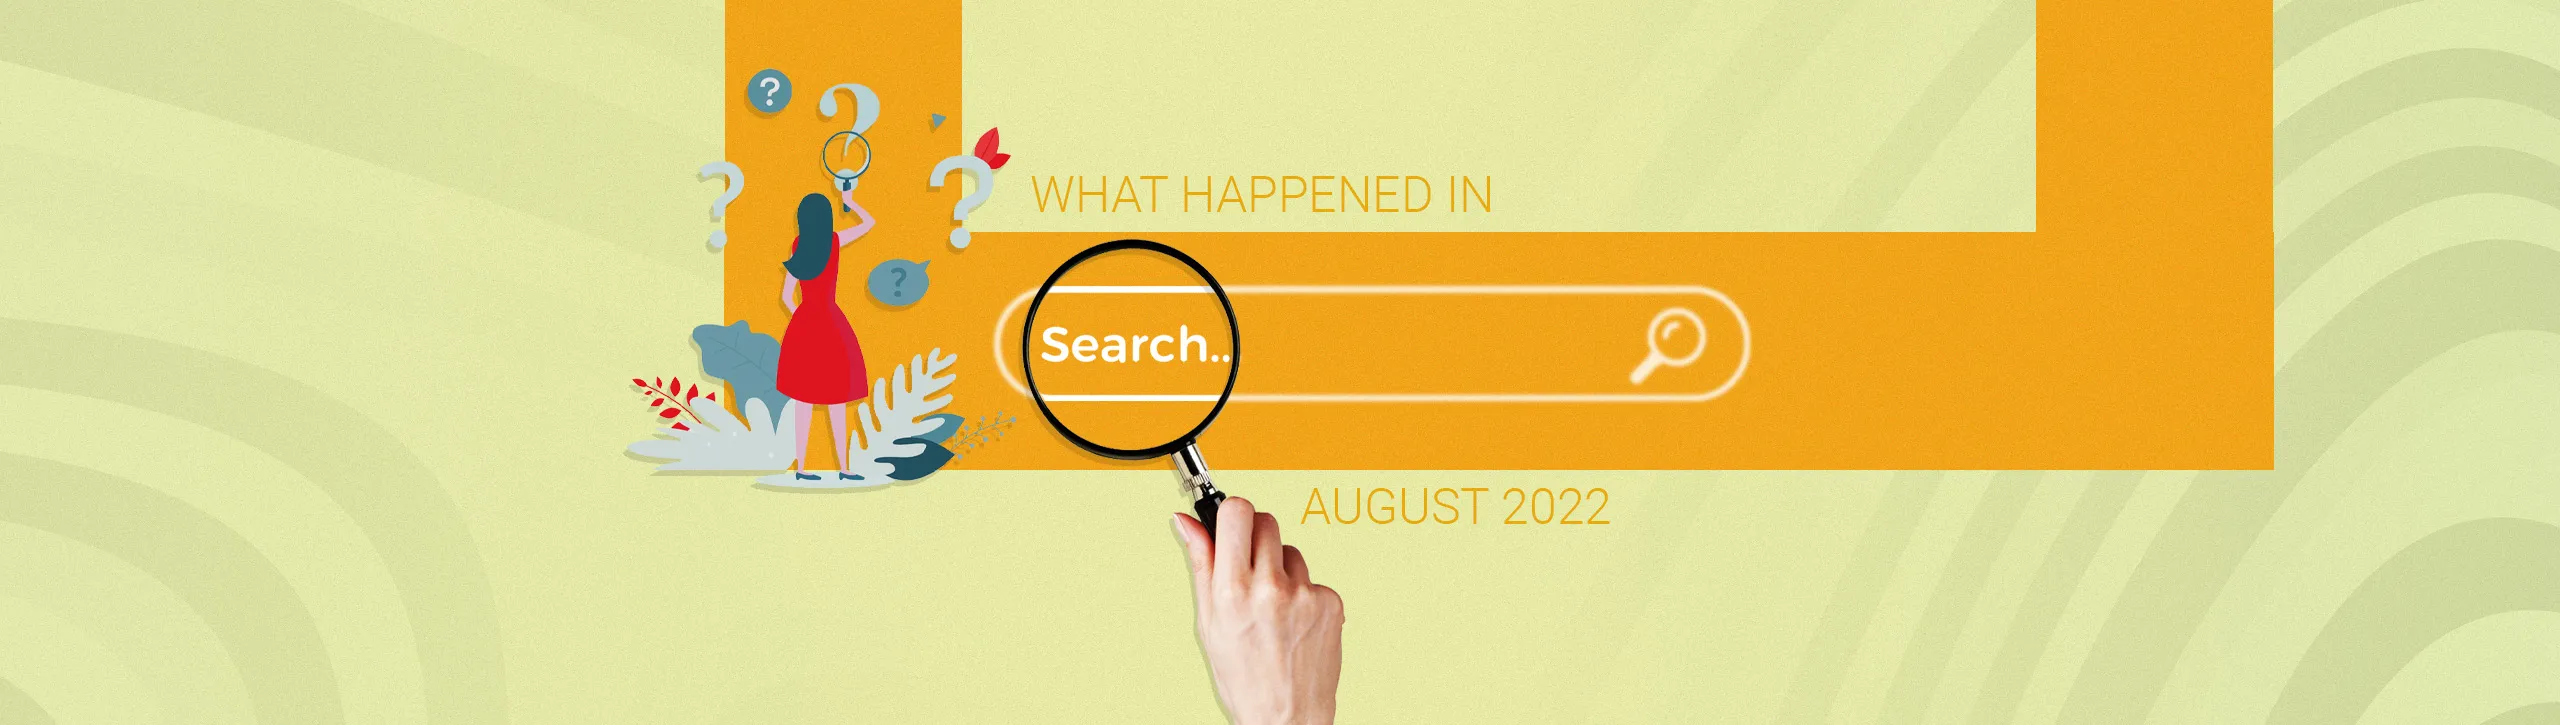 What happened in search August 2022